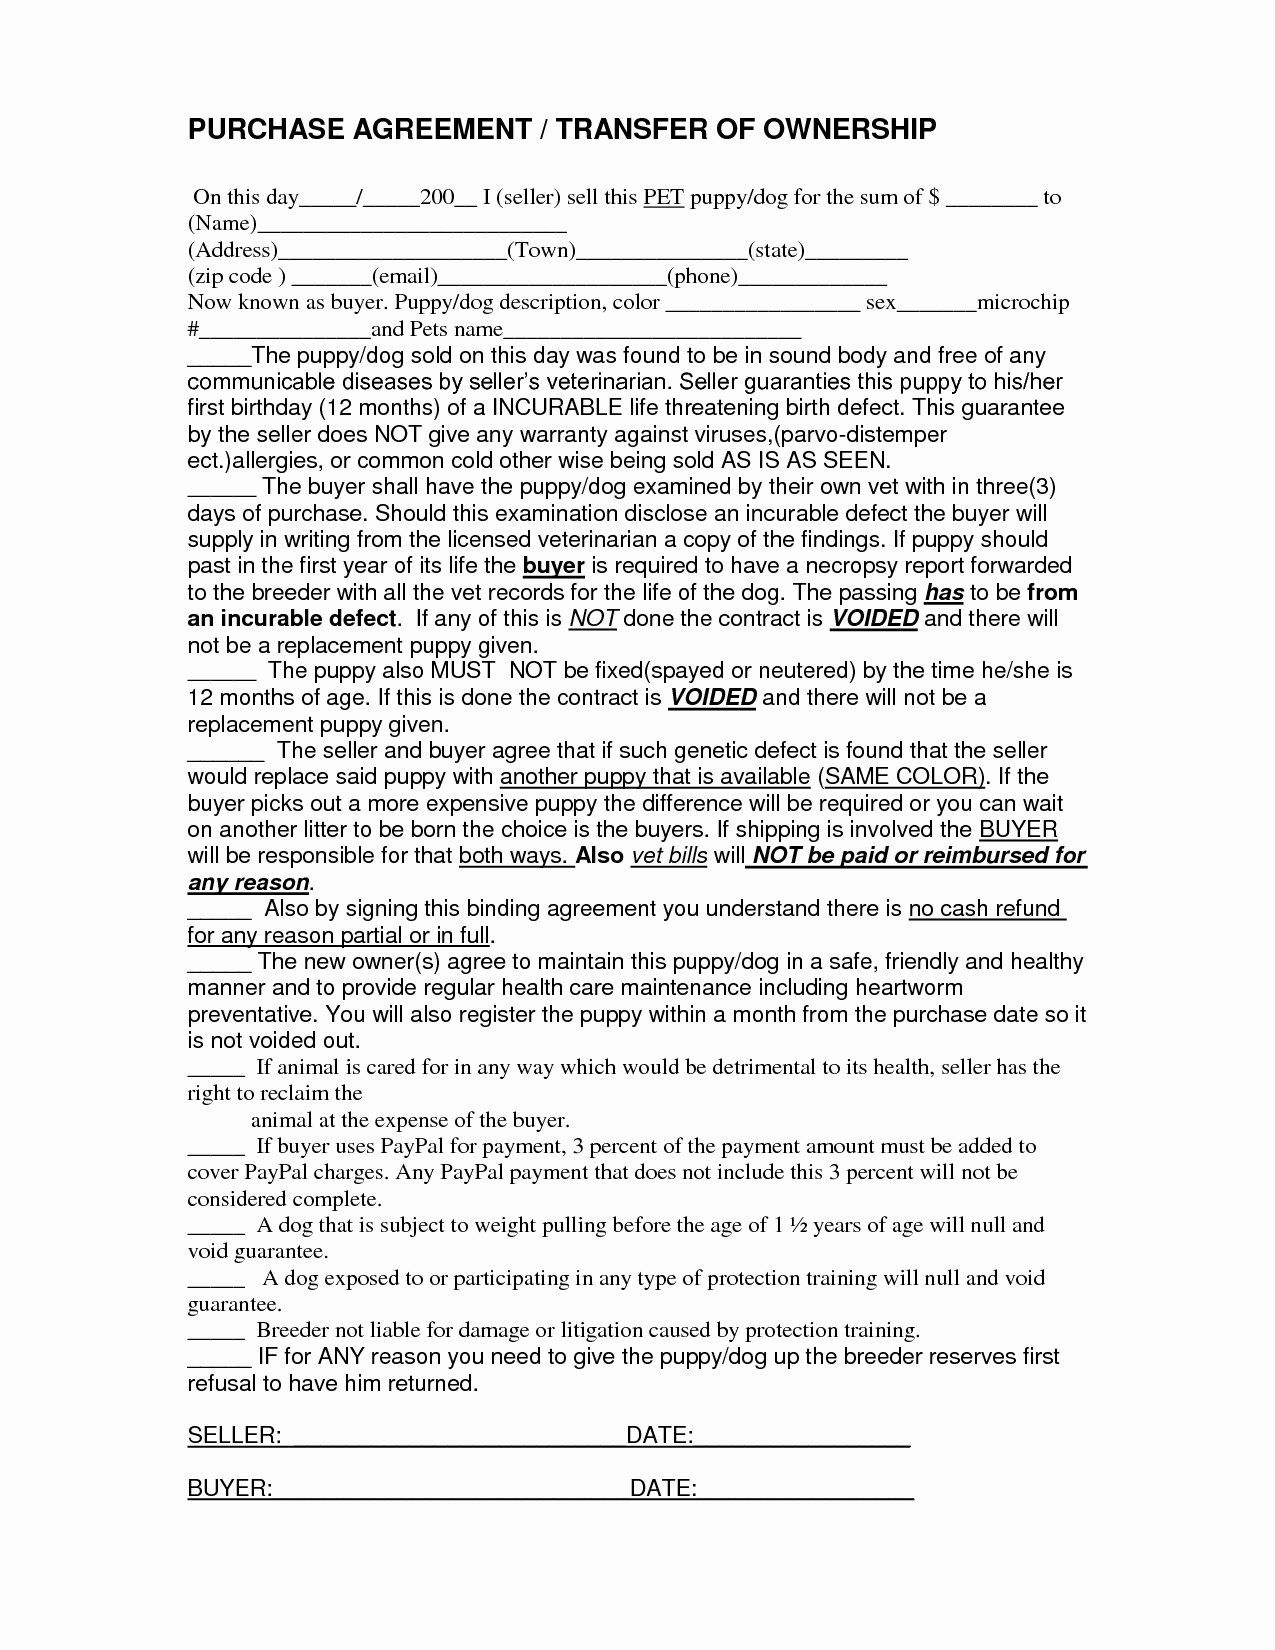 50 Home Purchase Agreement Template | Culturatti - Free Printable Real Estate Purchase Agreement